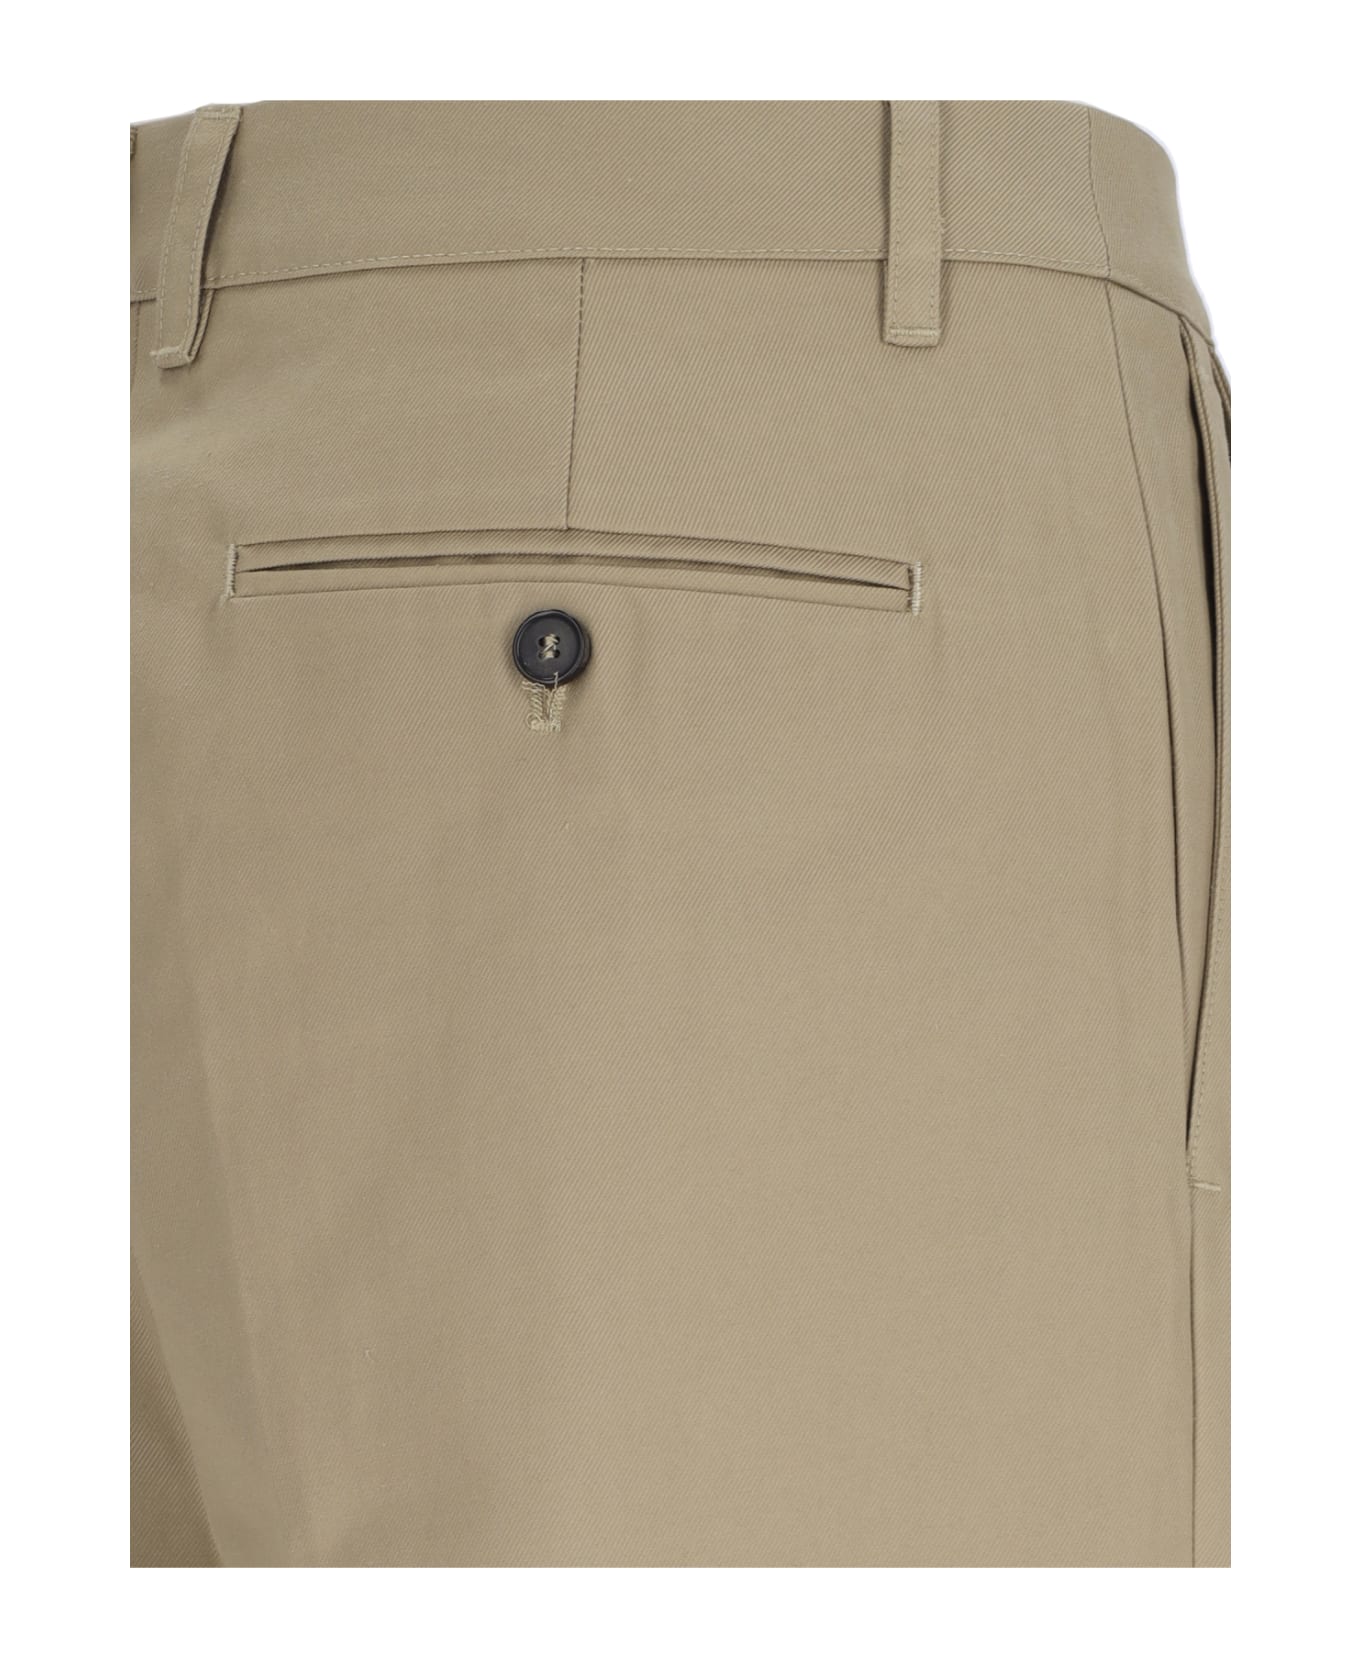 Dunst Pin Tuck Trousers - Beige name:467